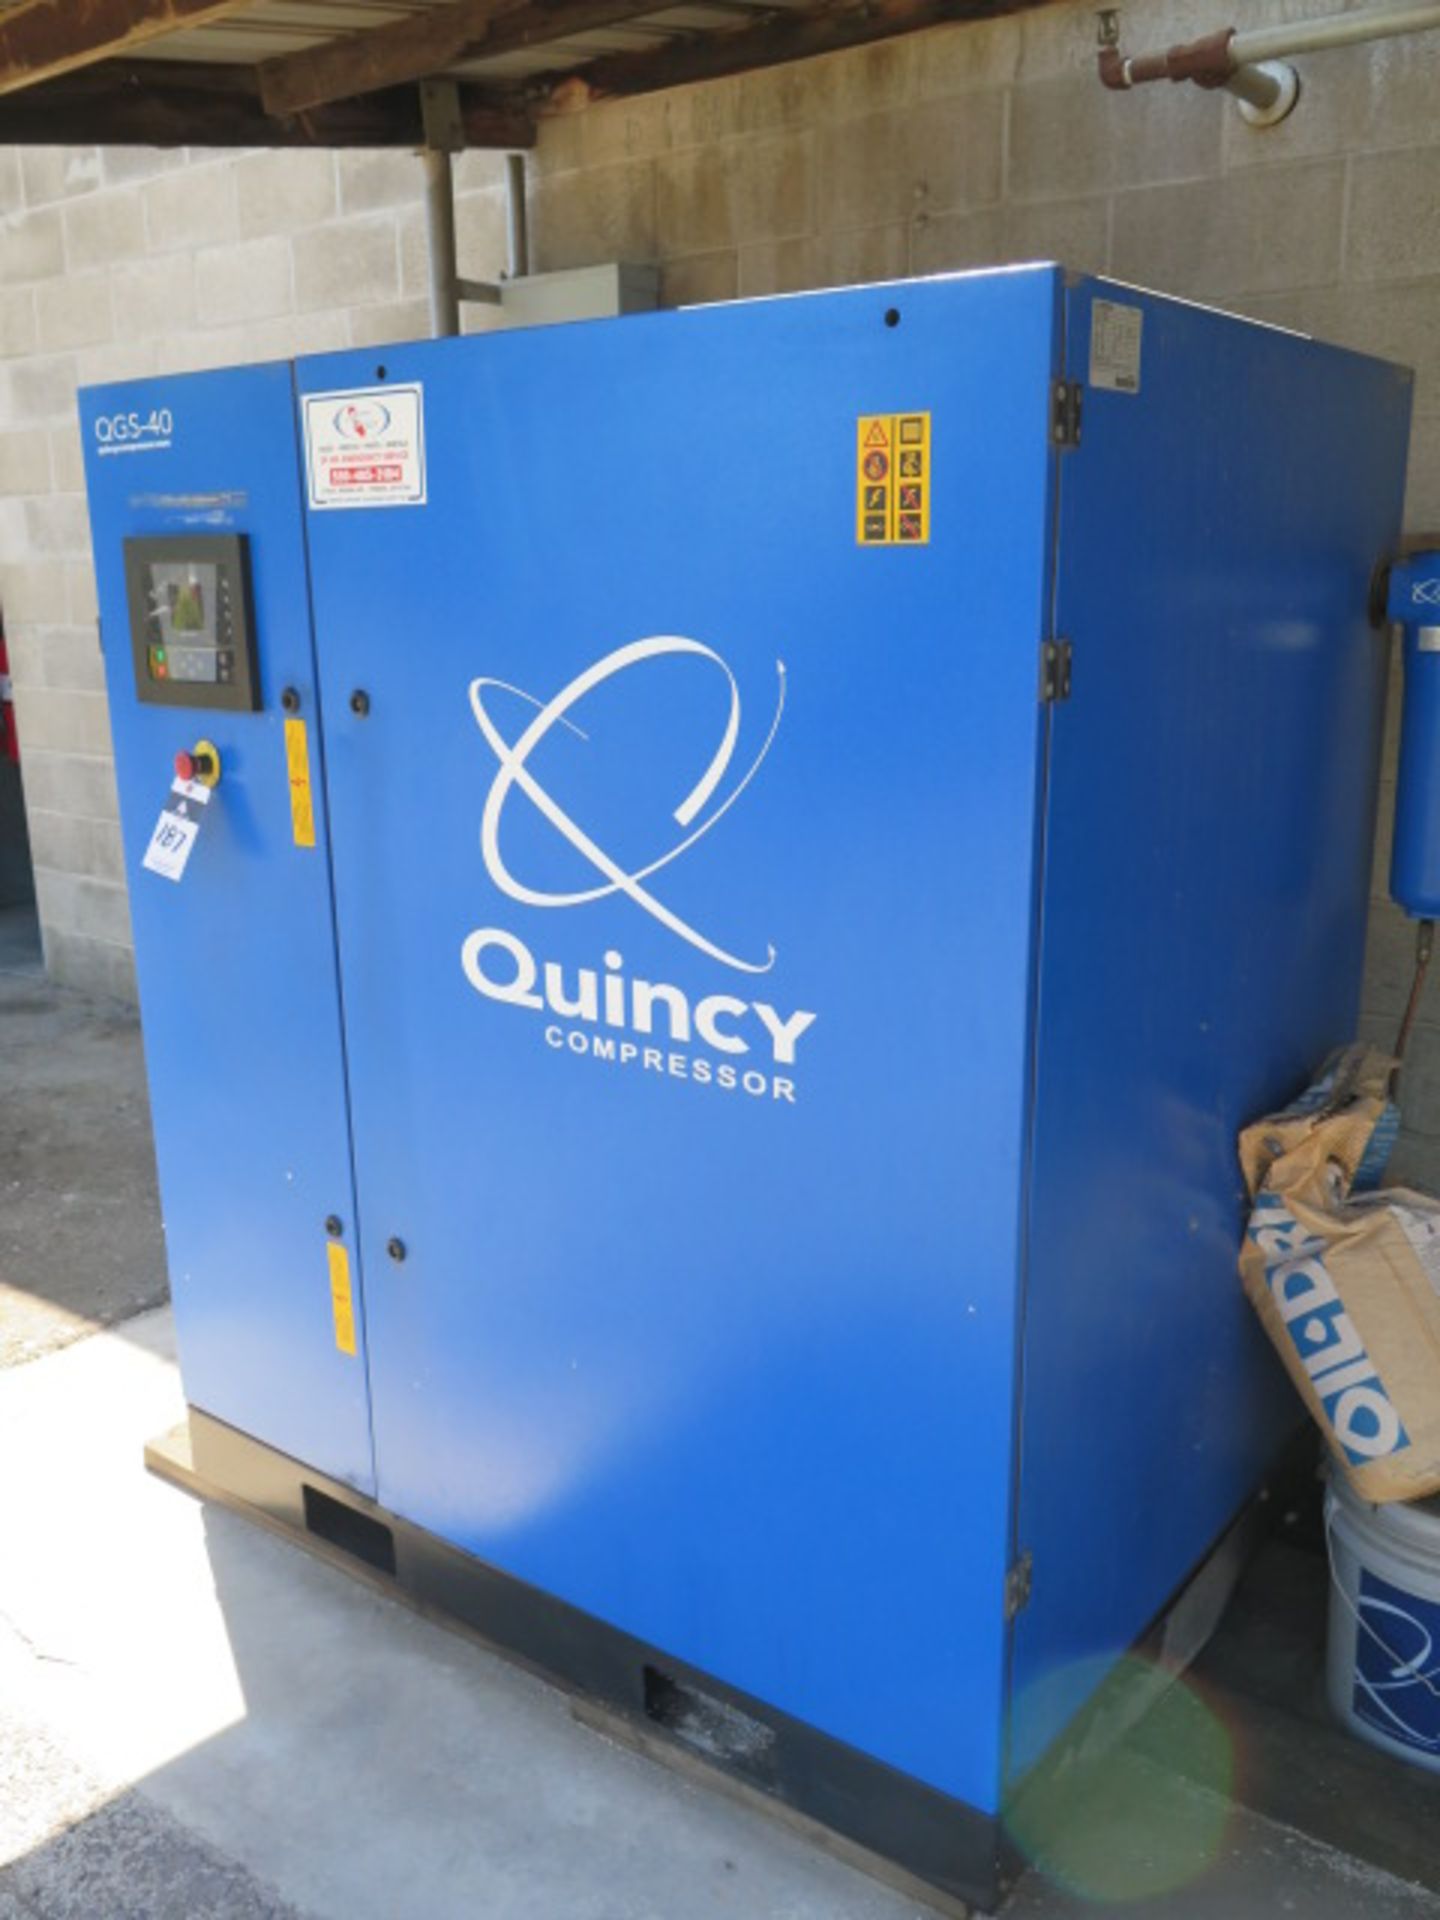 2014 Quincy QGS40 40Hp Rotary Air Compressor s/n API123023 w/ 13,358 Hours - Image 2 of 7